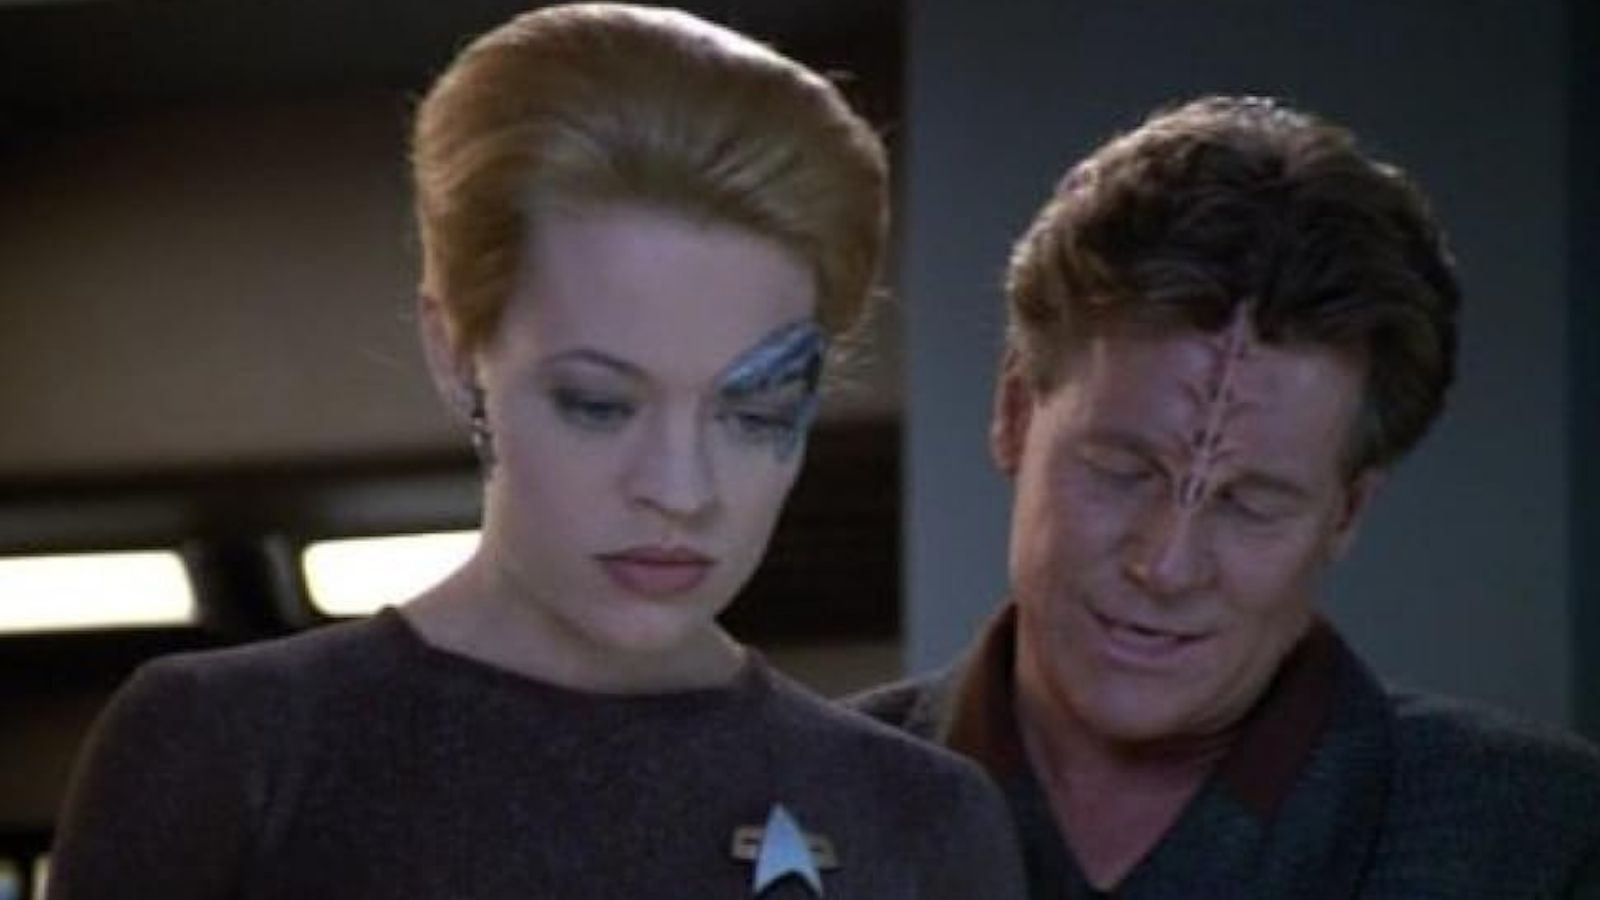 <span>It’s no secret that some of Star Trek’s storylines have been dubious, politically incorrect, and, at other times, extremely cringy to watch. </span>  <span>Retrospect, S4, Ep 17 has been heavily criticized for its portrayal of a female rape victim and how her accusations and credibility were undermined.</span>  <span>In the episode, Seven of Nine accuses Kovin of violating her, but her claims aren’t taken seriously. Kovin disappears without explanation, and Seven’s reliability as a witness and victim is questioned. </span>